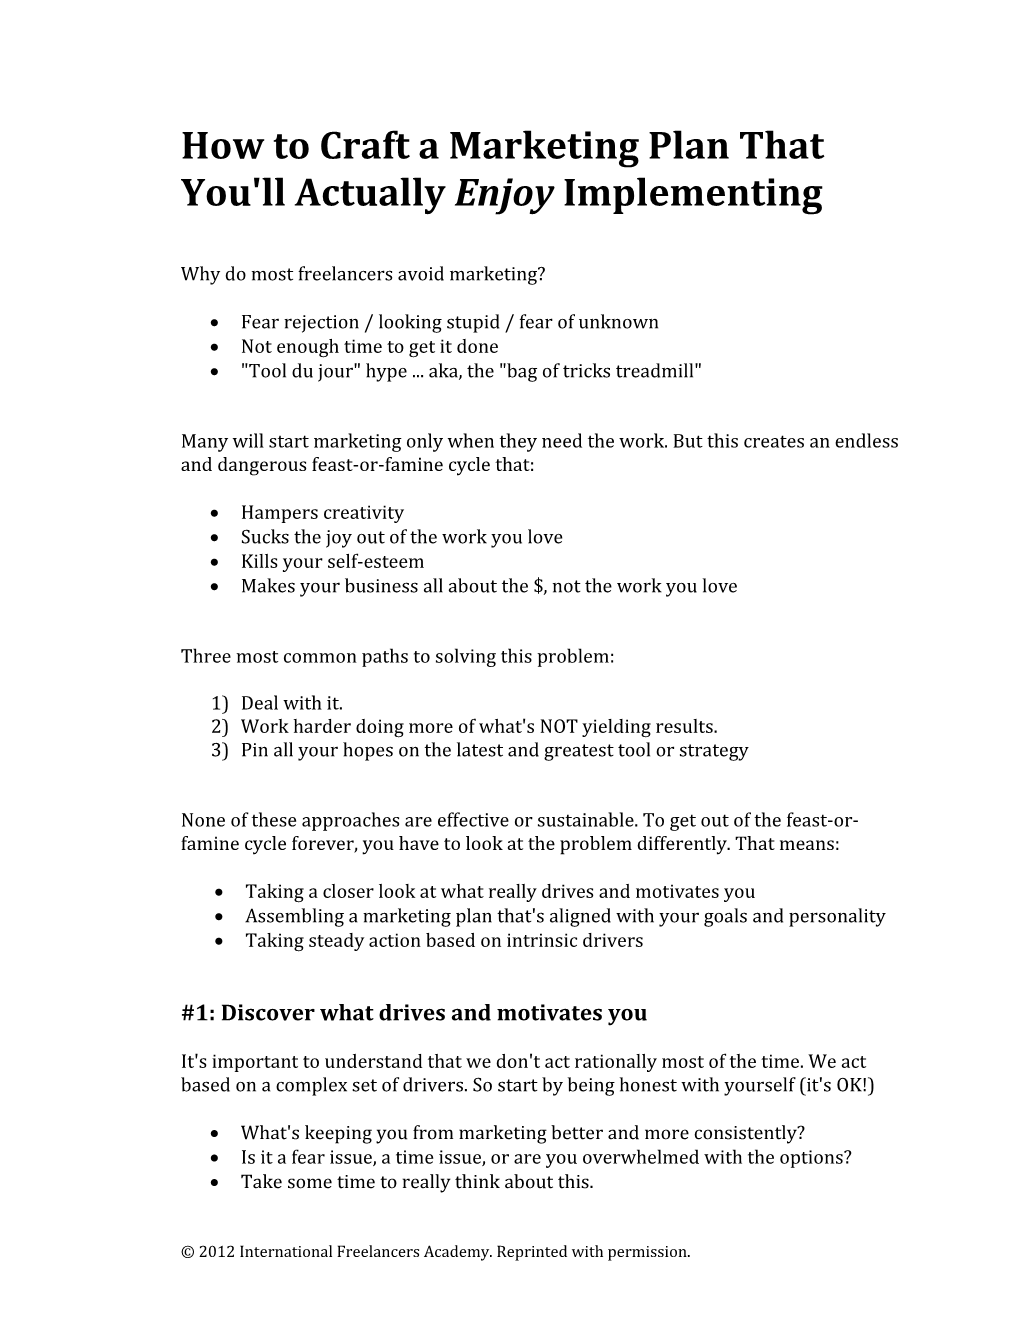 How to Craft a Marketing Plan That You'll Actually Enjoy Implementing